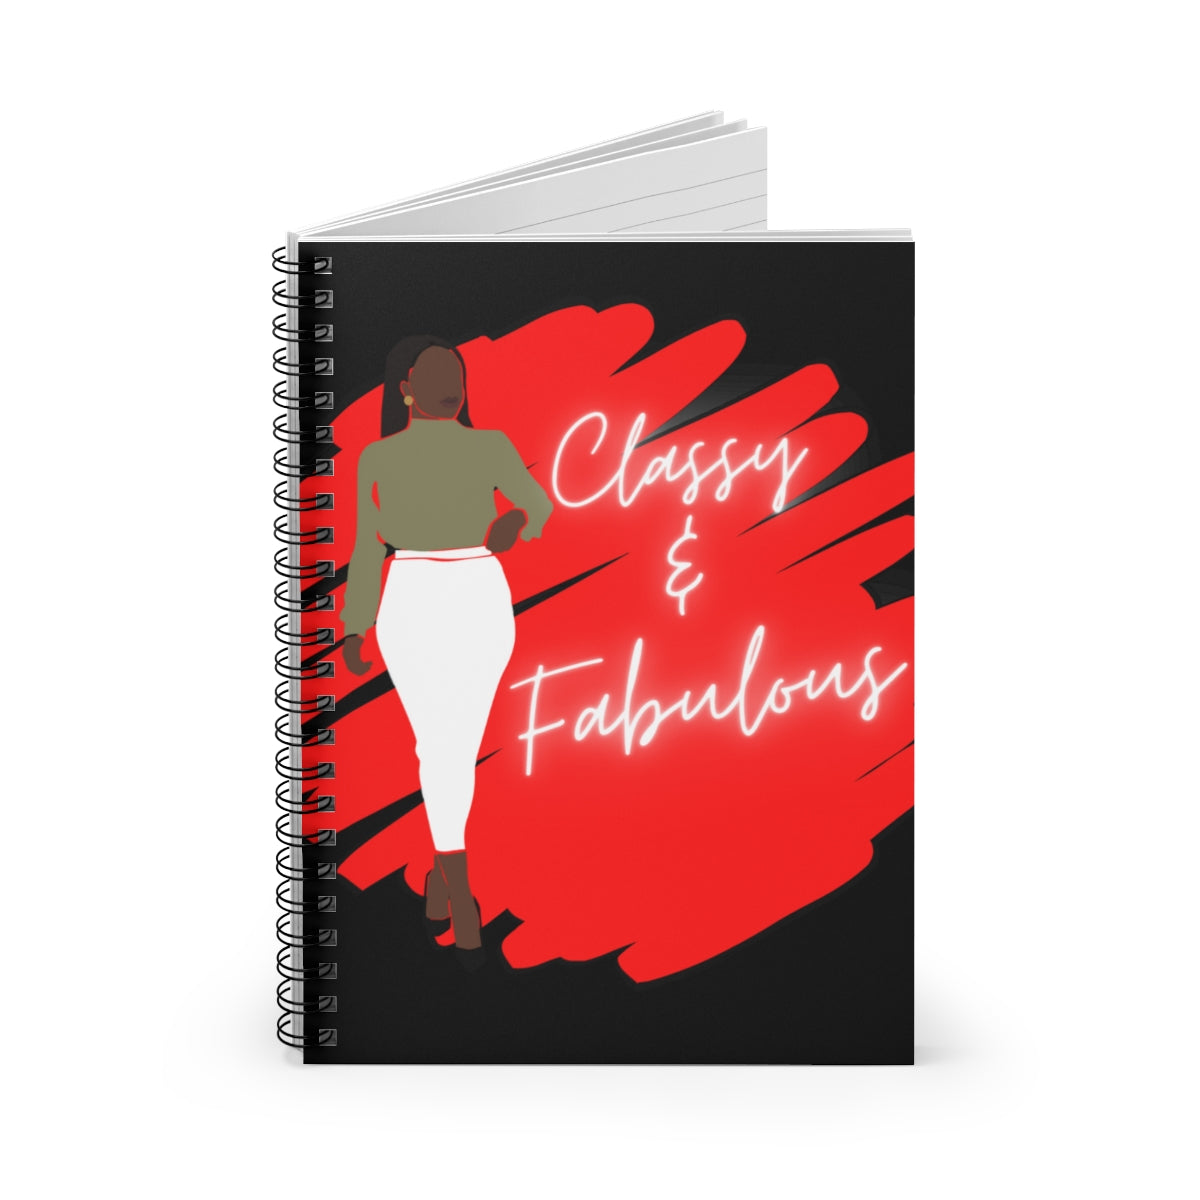 Classy & Fabulous Spiral Notebook - Ruled Line